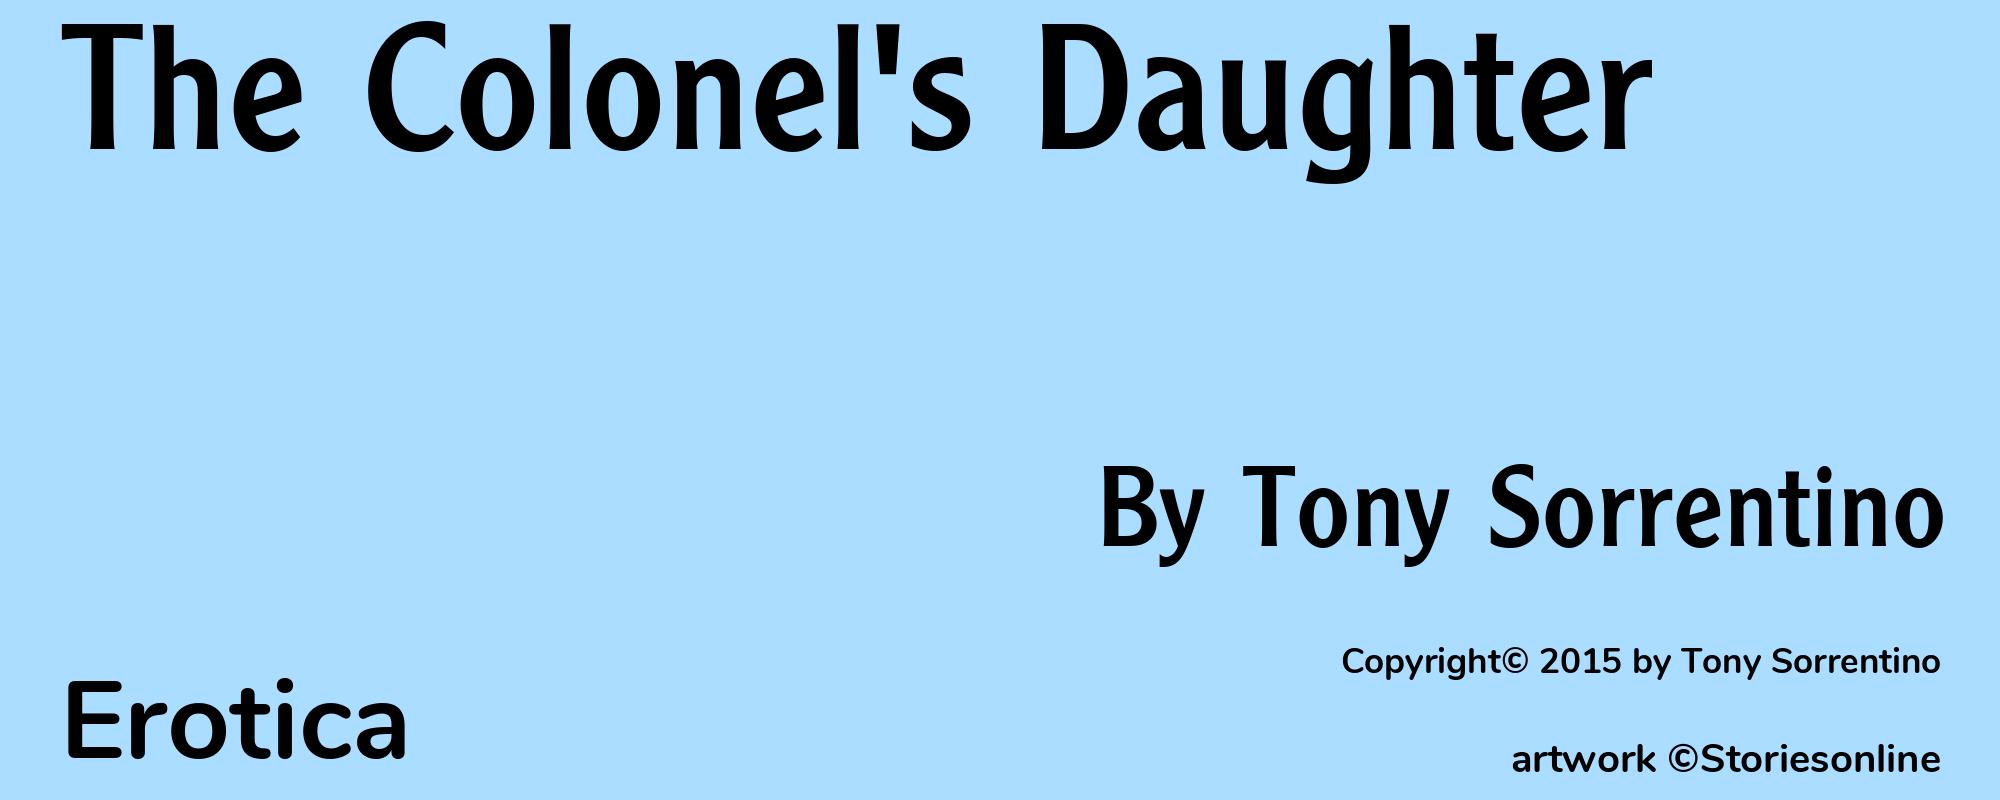 The Colonel's Daughter - Cover